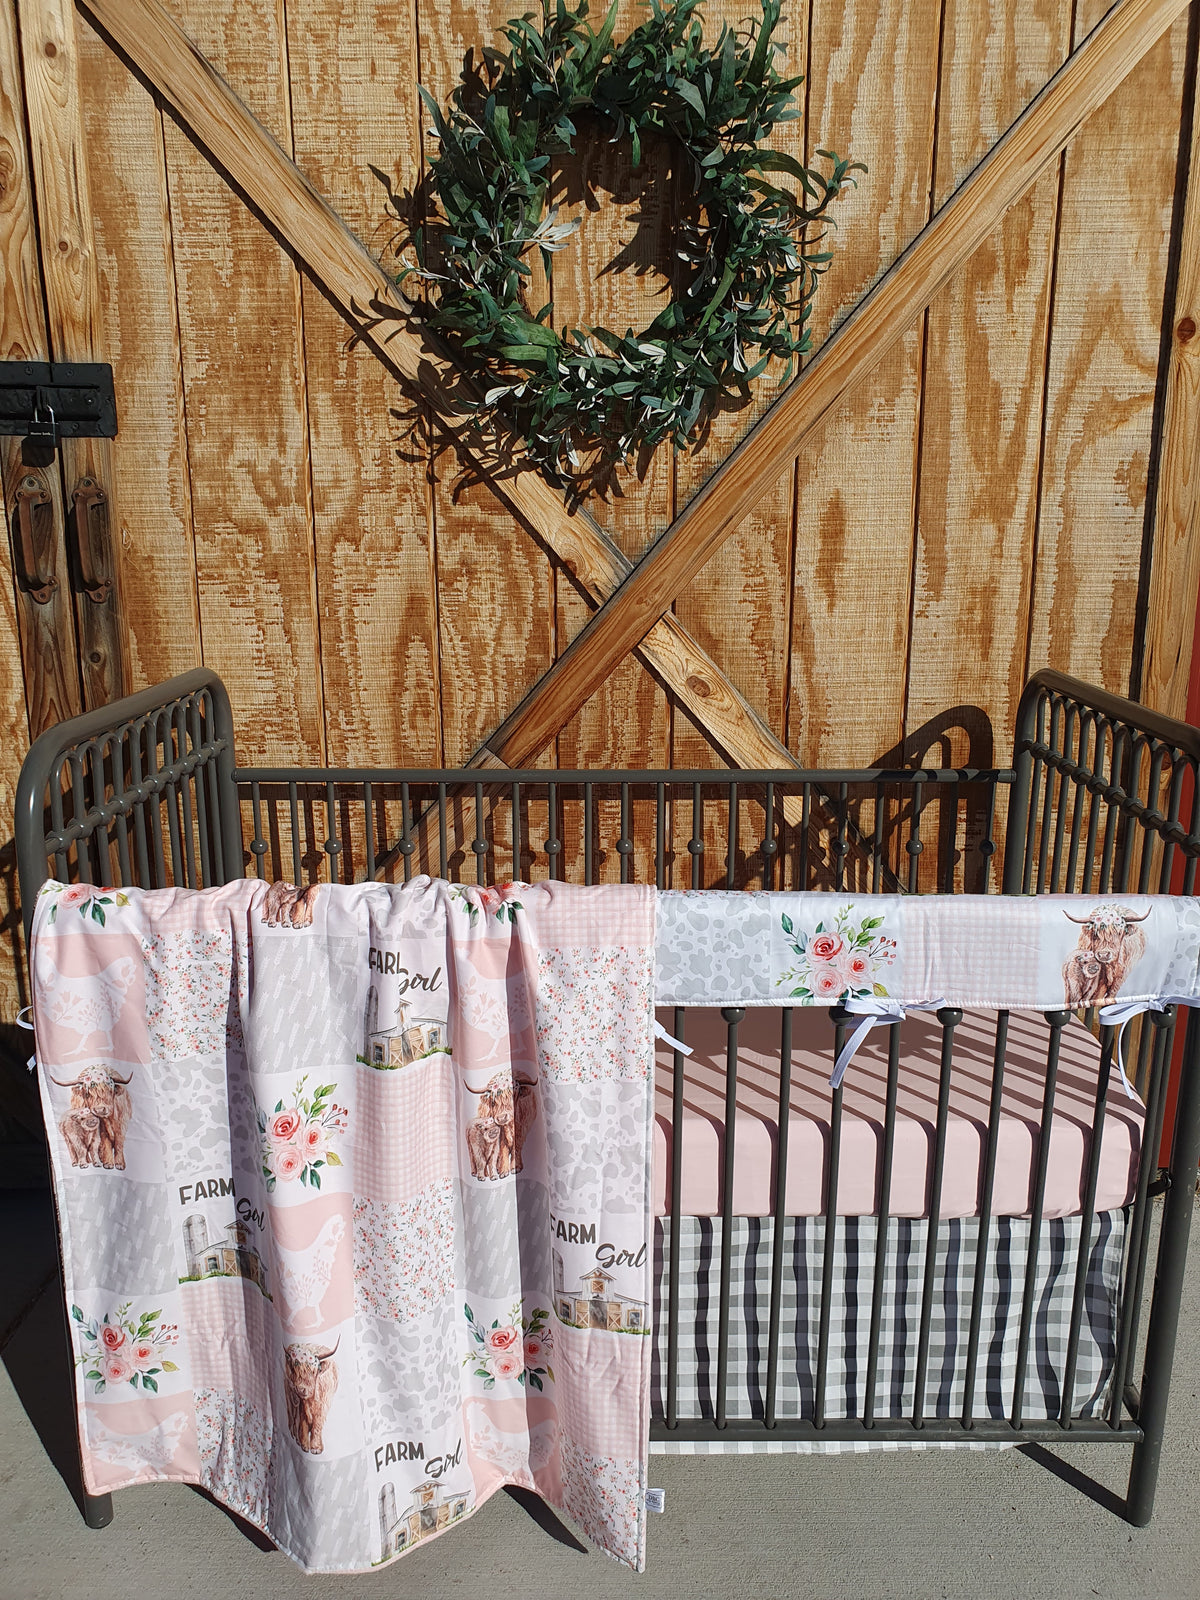 New Release Girl Crib Bedding - Highland Cow Farm Girl in Pink Gray Baby Bedding &amp; Nursery Collection - DBC Baby Bedding Co 